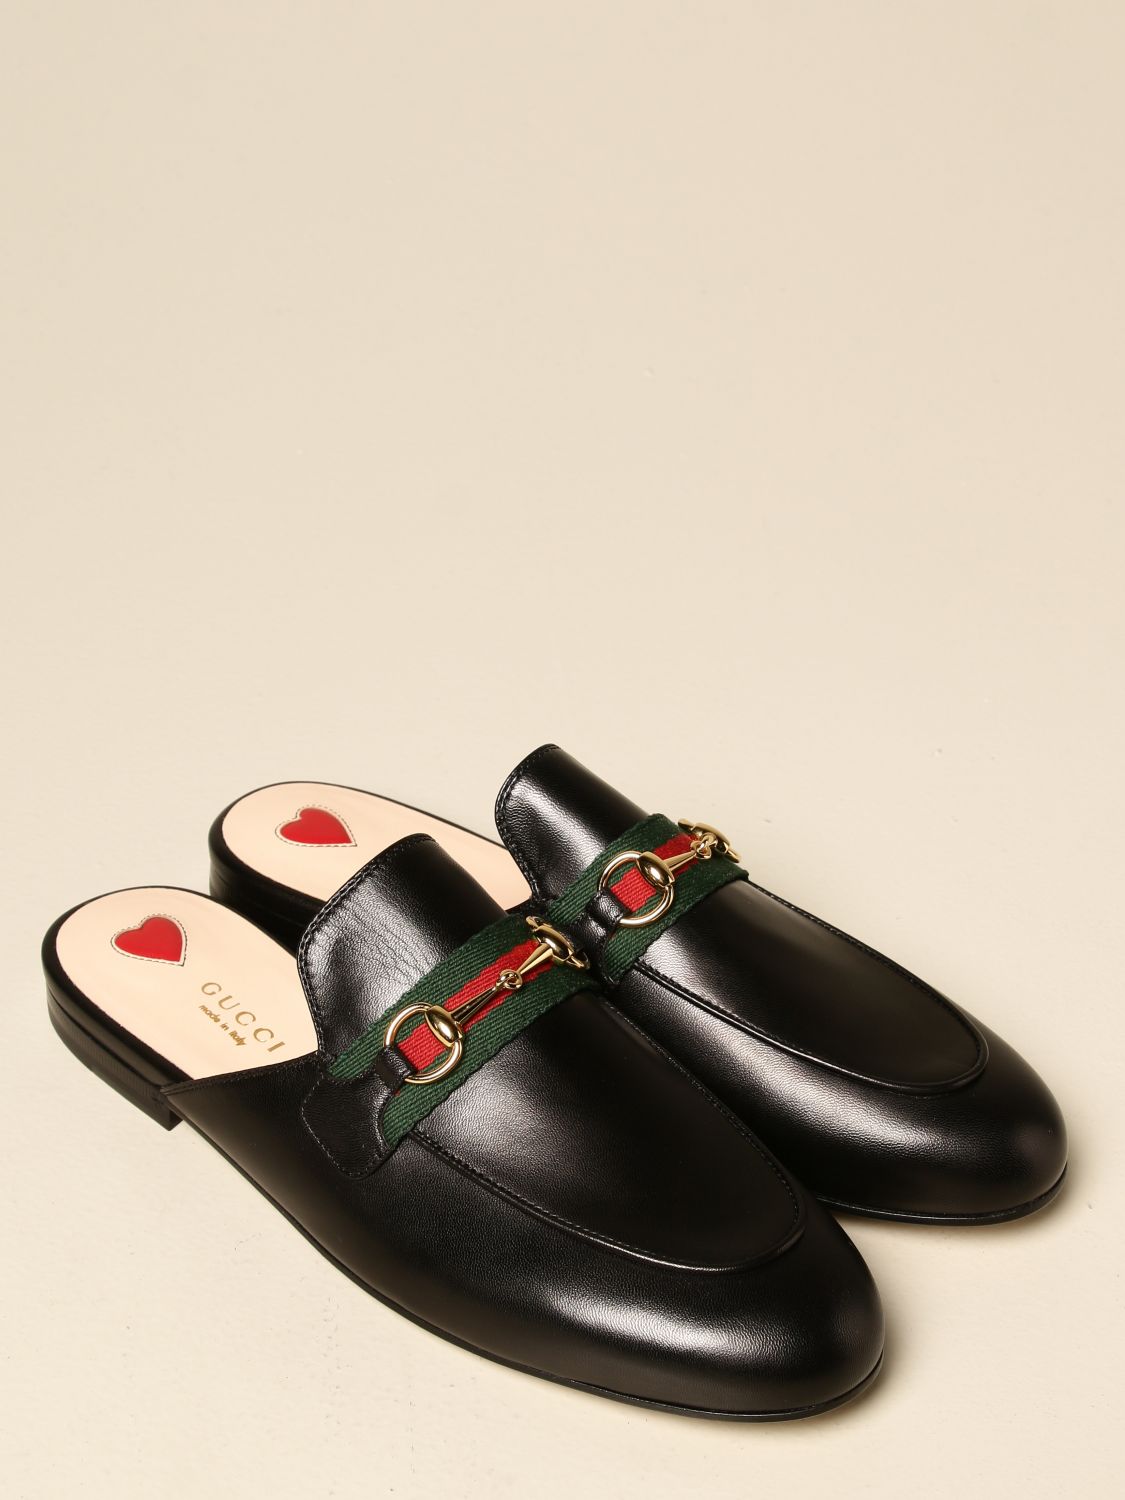 gucci princetown leather slipper